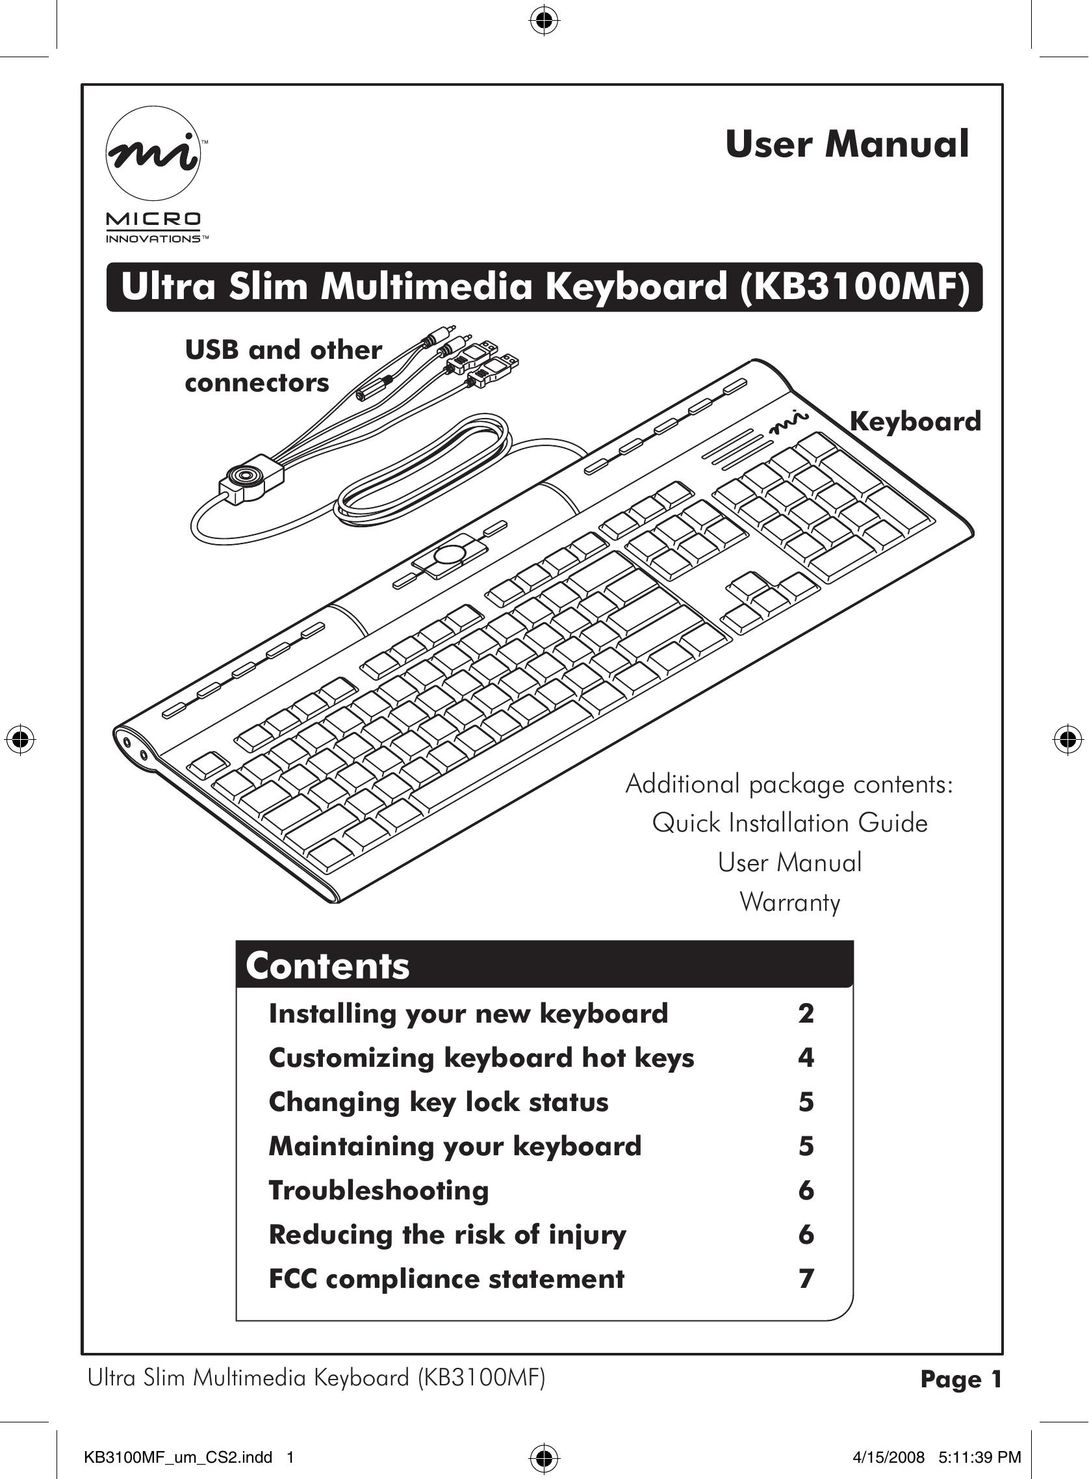 Micro Innovations KB3100MF Mouse User Manual